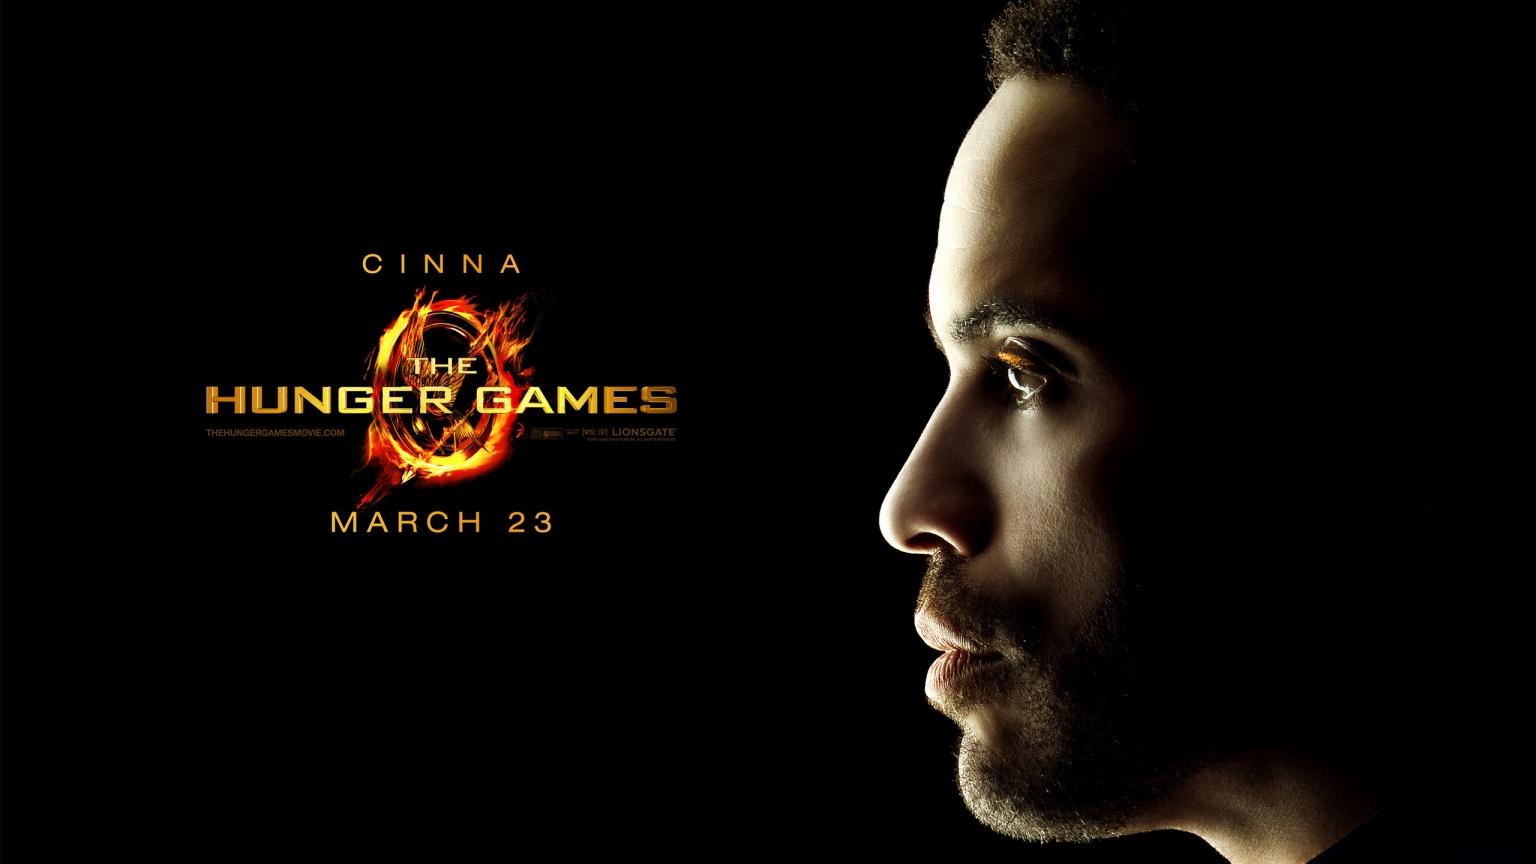 The Hunger Games Cinna for 1536 x 864 HDTV resolution